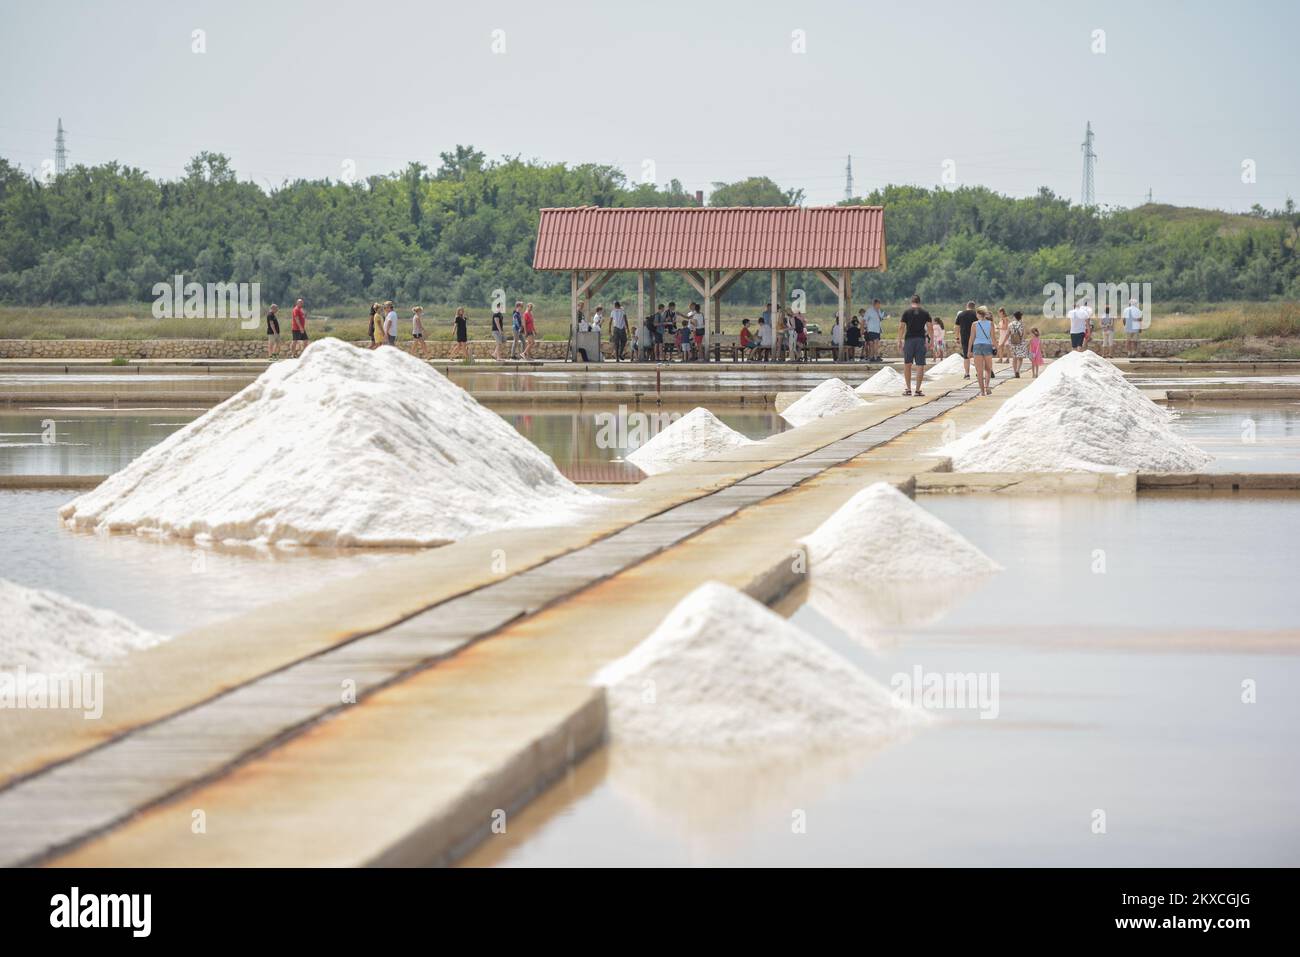 02.08.2019., Nin, Croatia - Solana Nin opens their doors to all visitors.  With free admission, you can feel free to look around the salt fields and  educate yourself about the process and